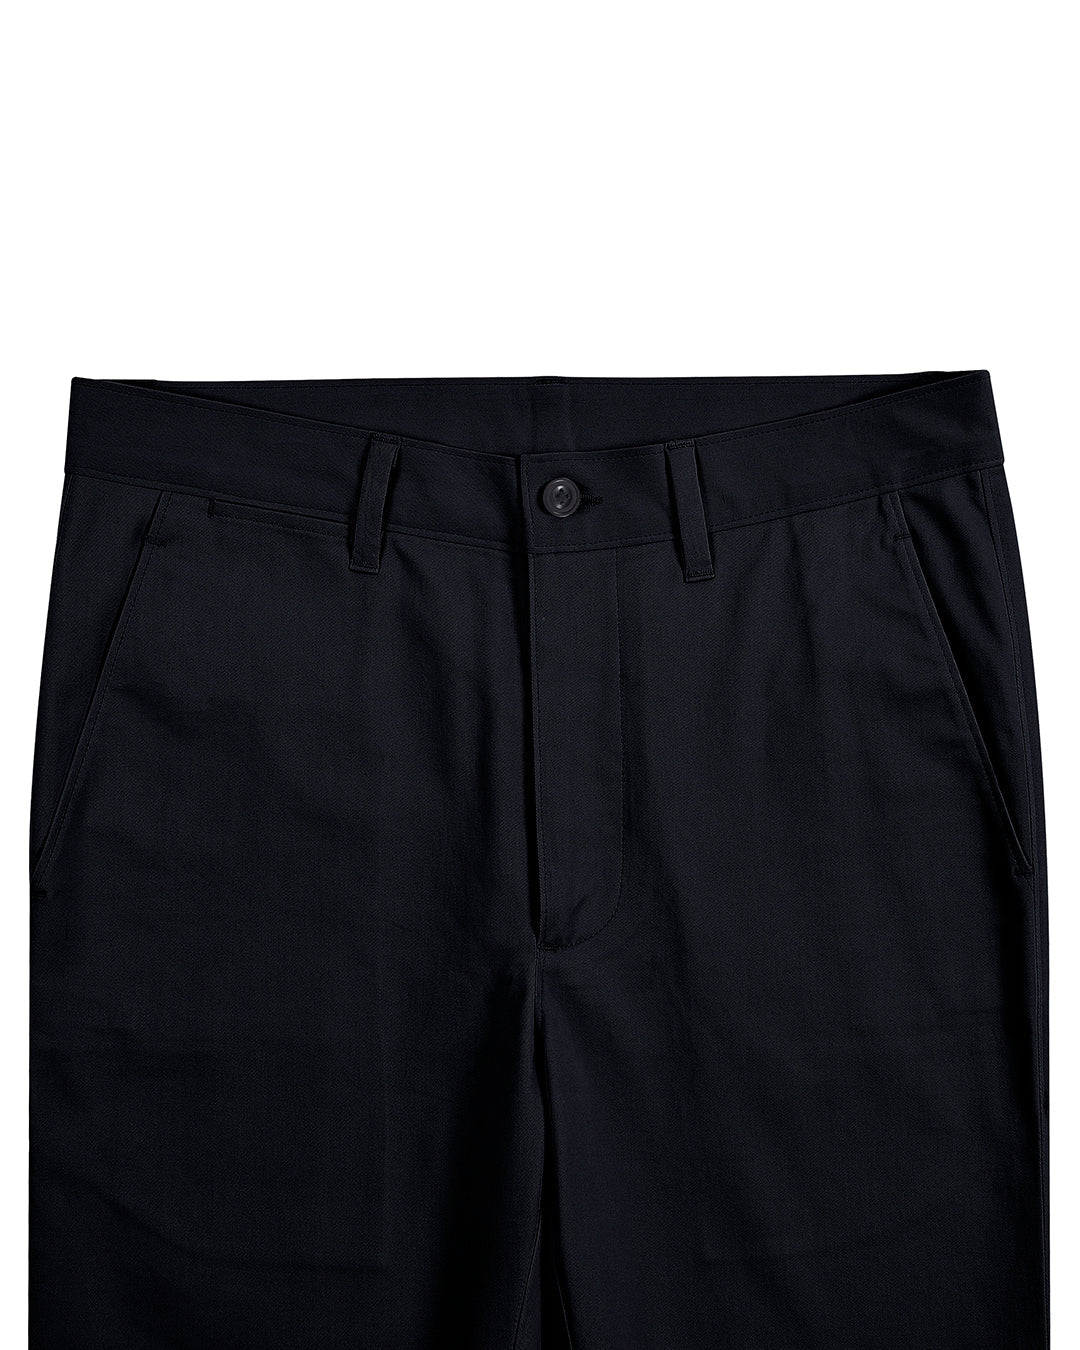 Front view of custom Genoa Chino pants for men by Luxire in navy